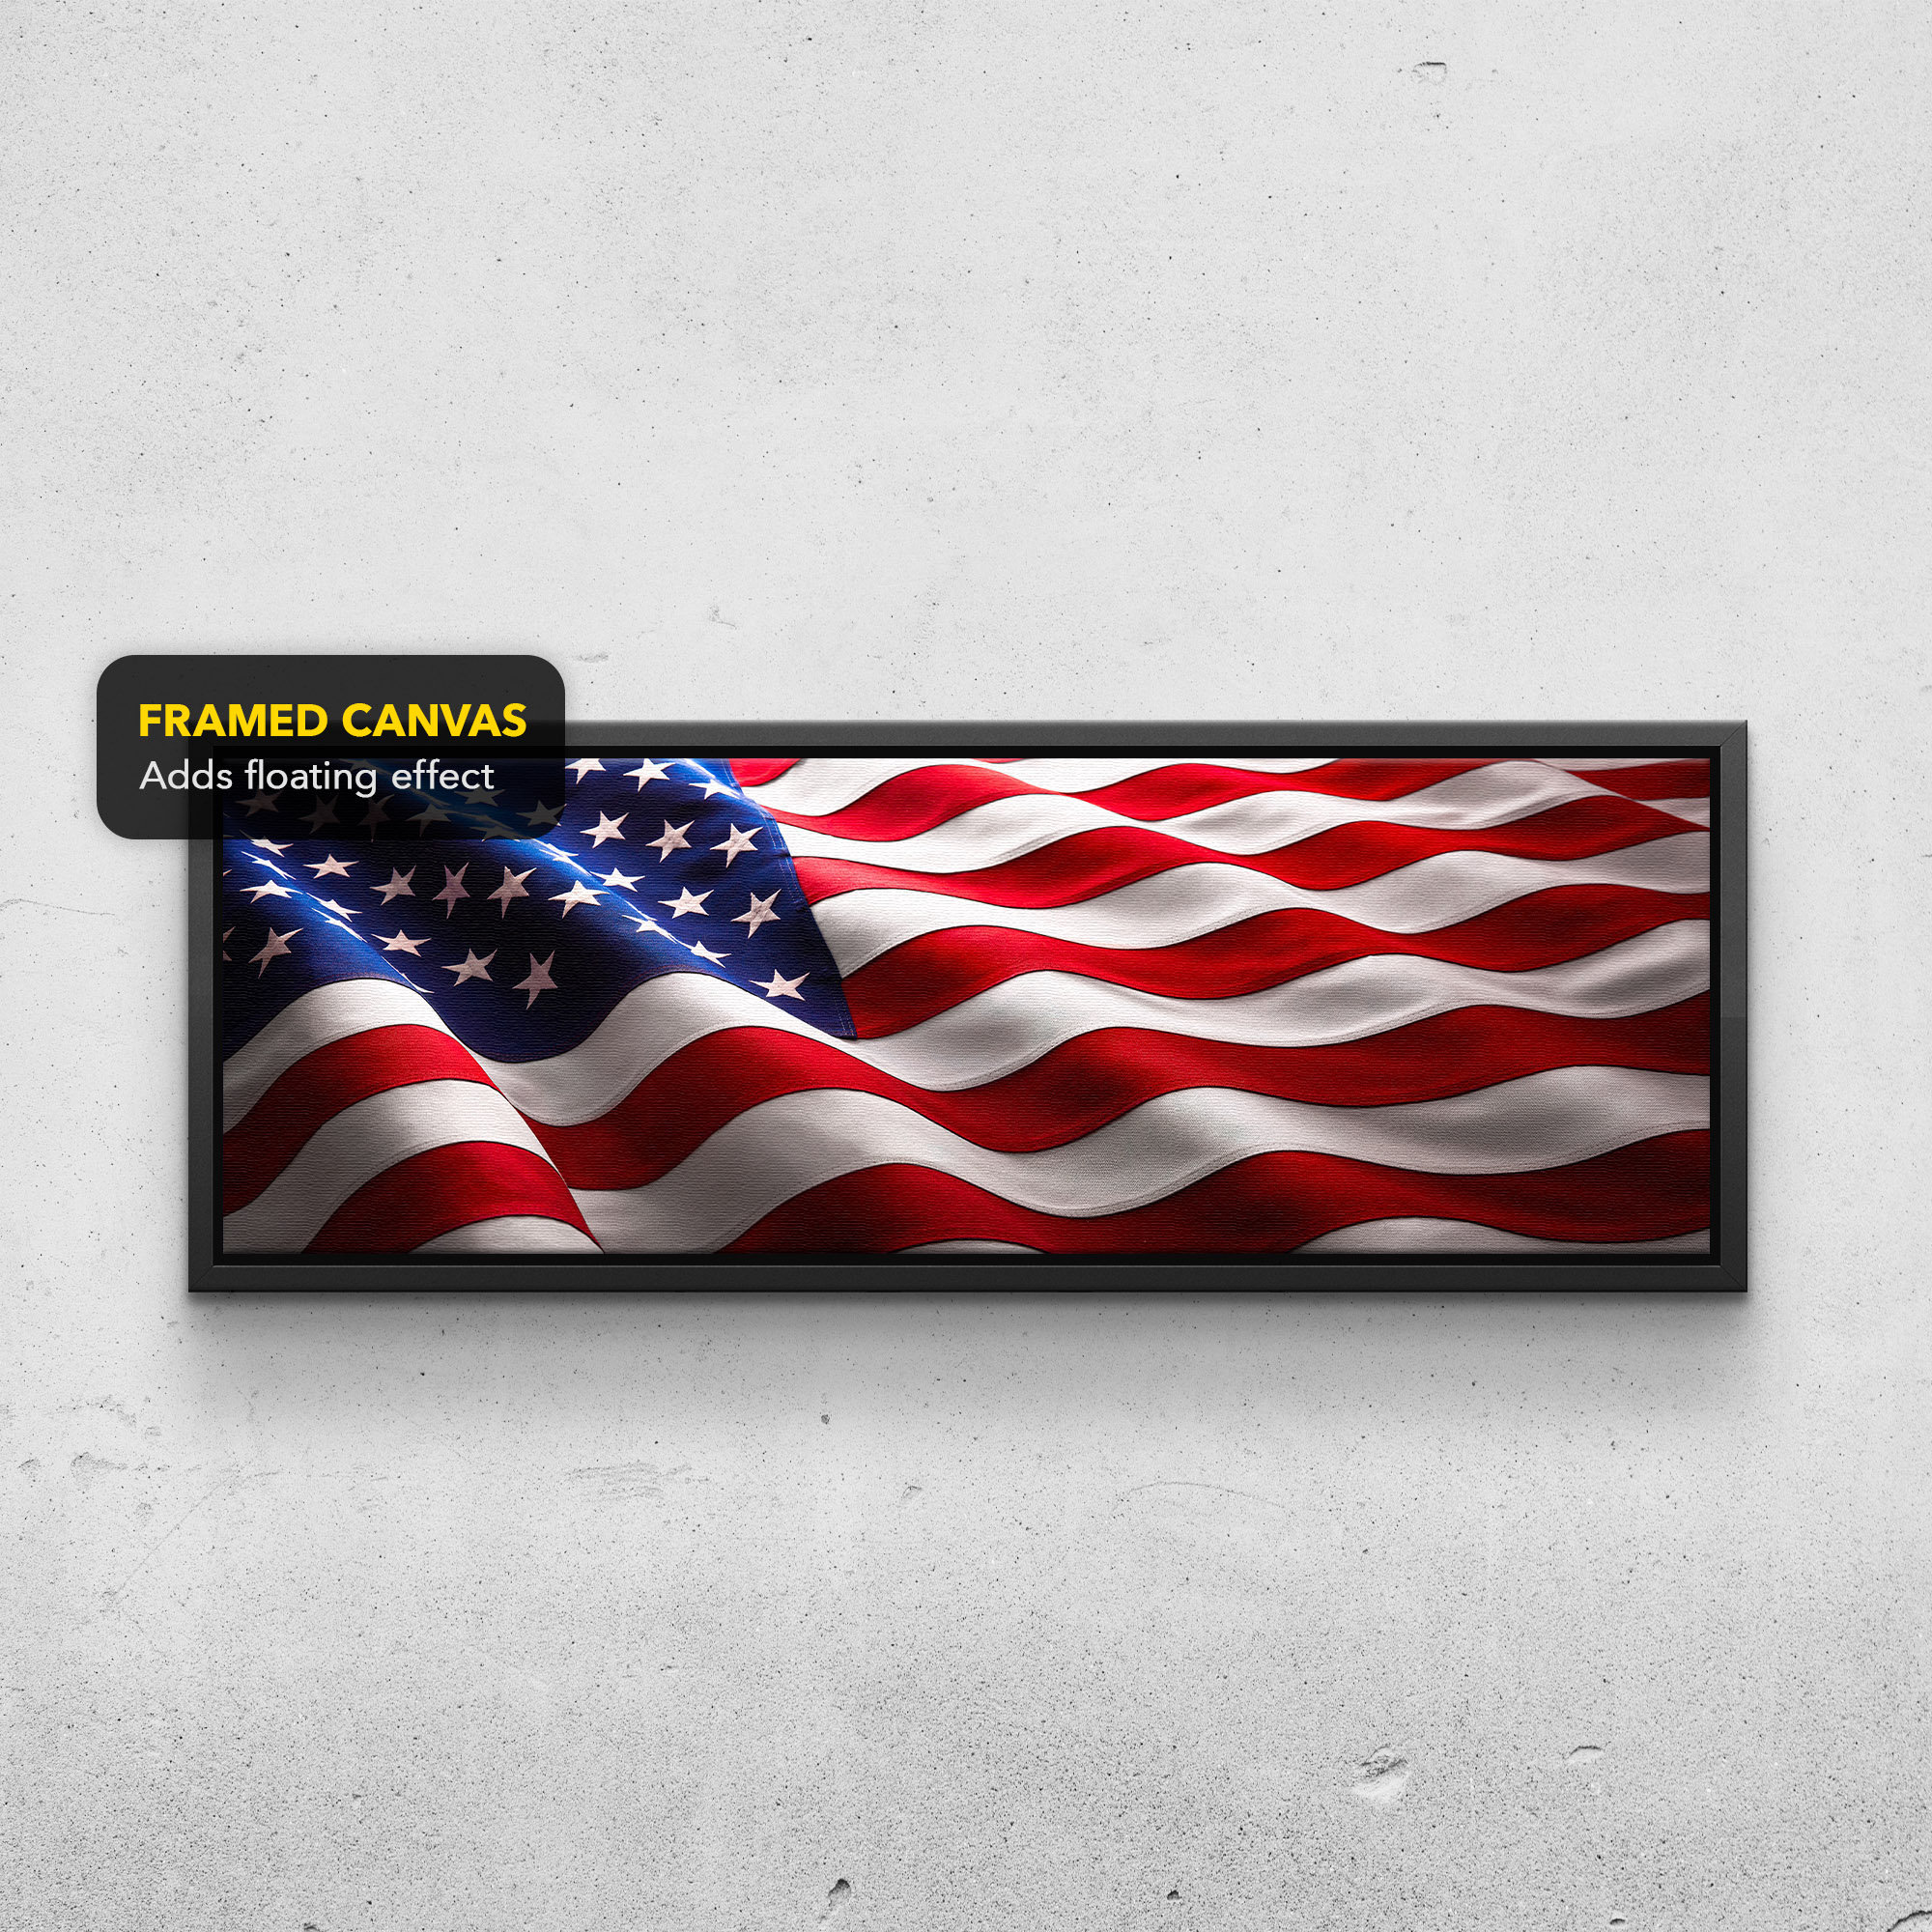 Wall Art, USA or Flag Large US Canvas Etsy Proud Poster, Print, Wall Flag Patriotic - American Office for Home American, Flag Decor